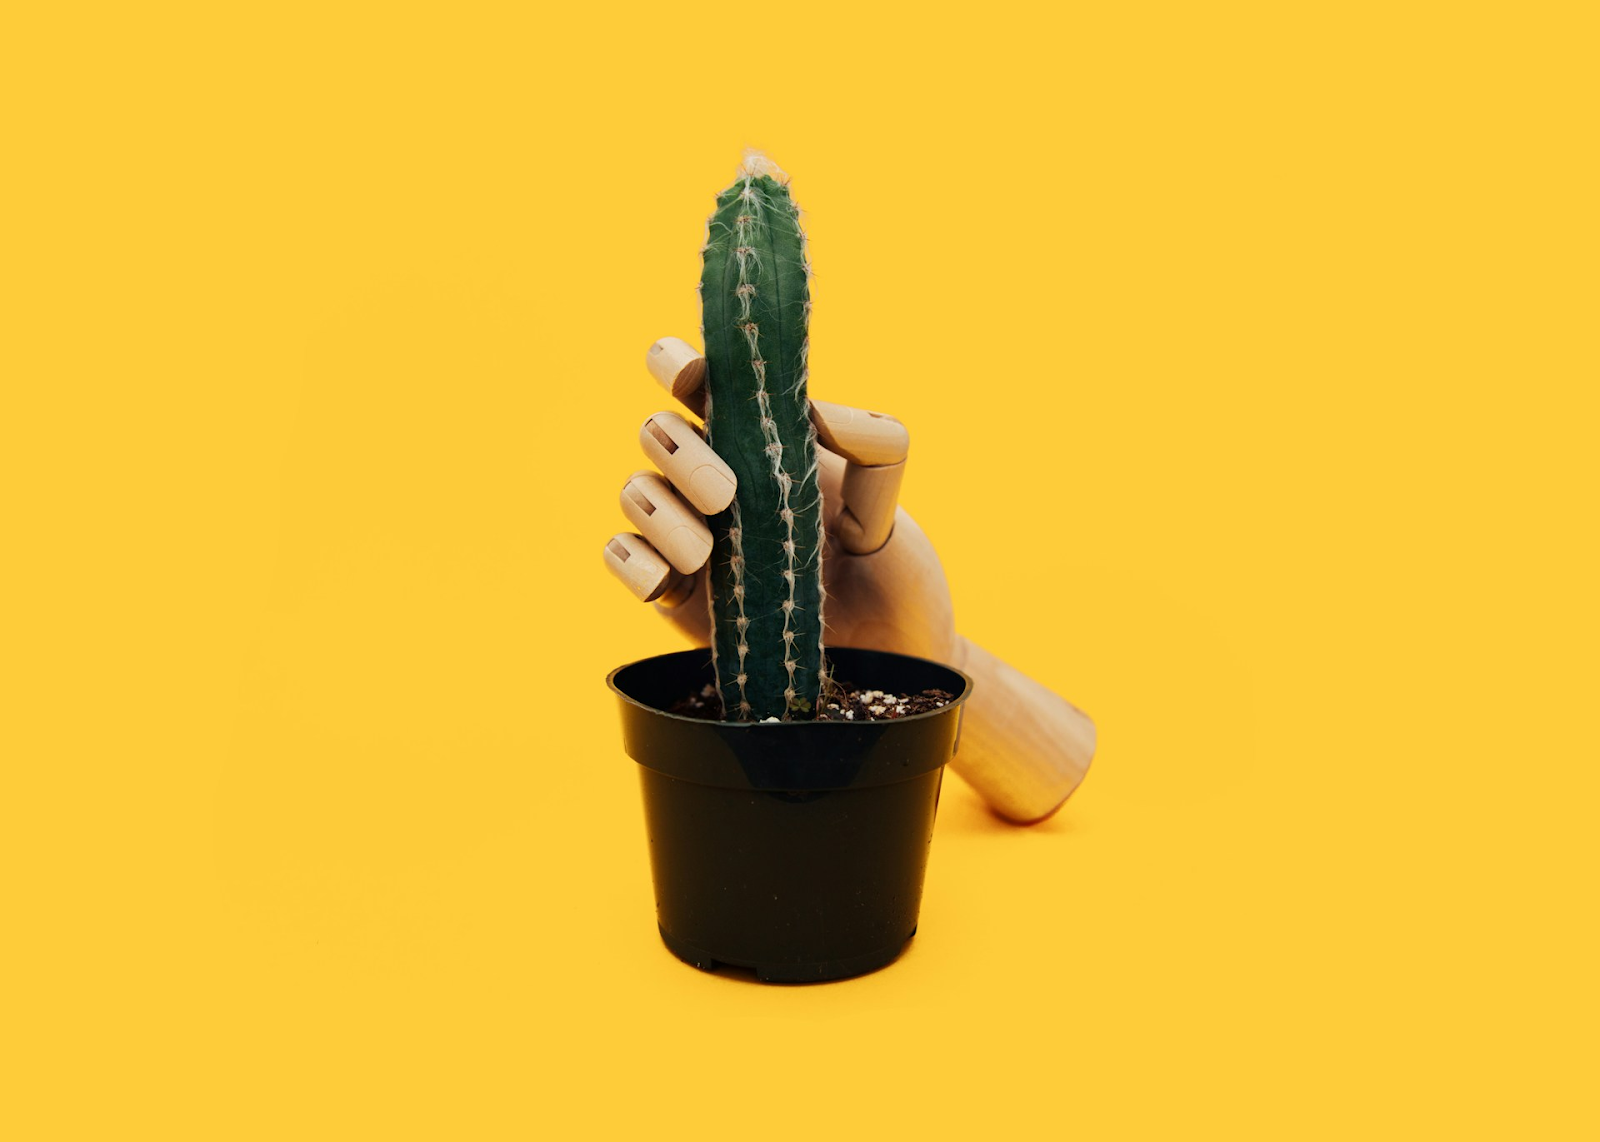 A cactus representing a sore penis held by a model hand - https://unsplash.com/photos/hand-mannequin-holding-green-cactus-plant-RoB4hHjW_fc